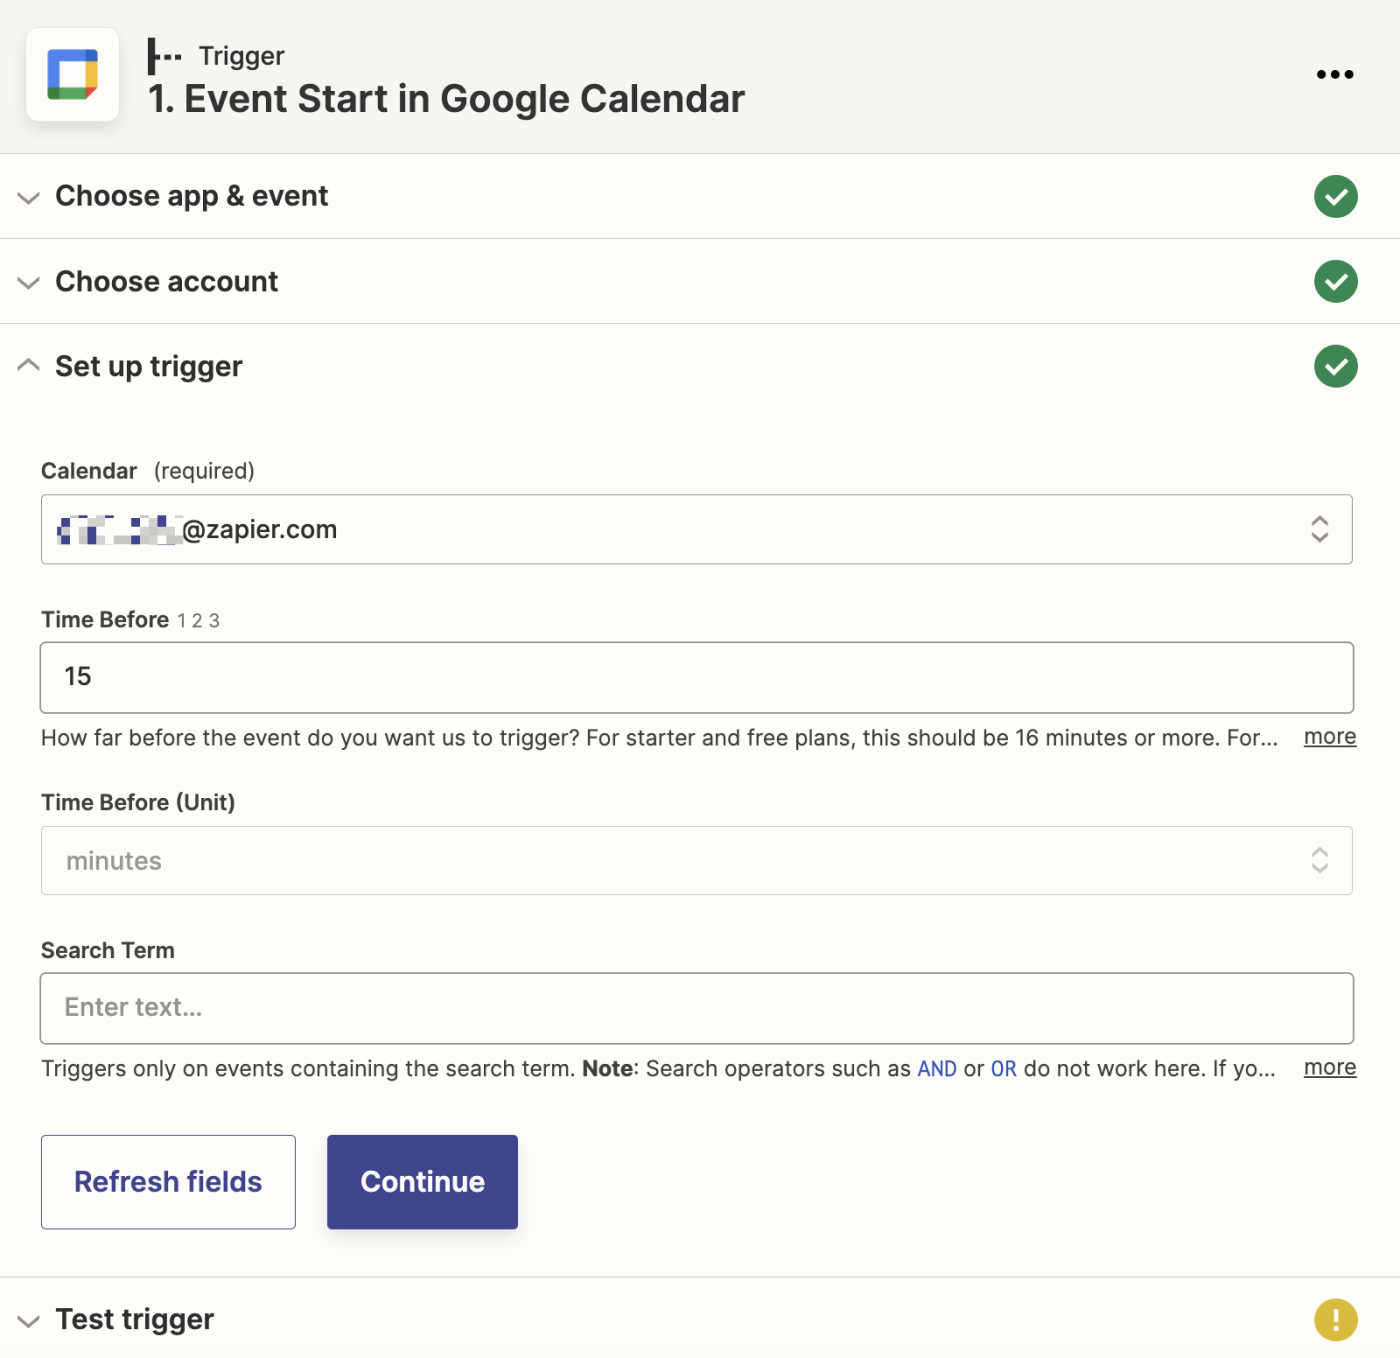 Trigger fields filled out for Google Calendar with a Google Calendar account selected in the Google Calendar account field.